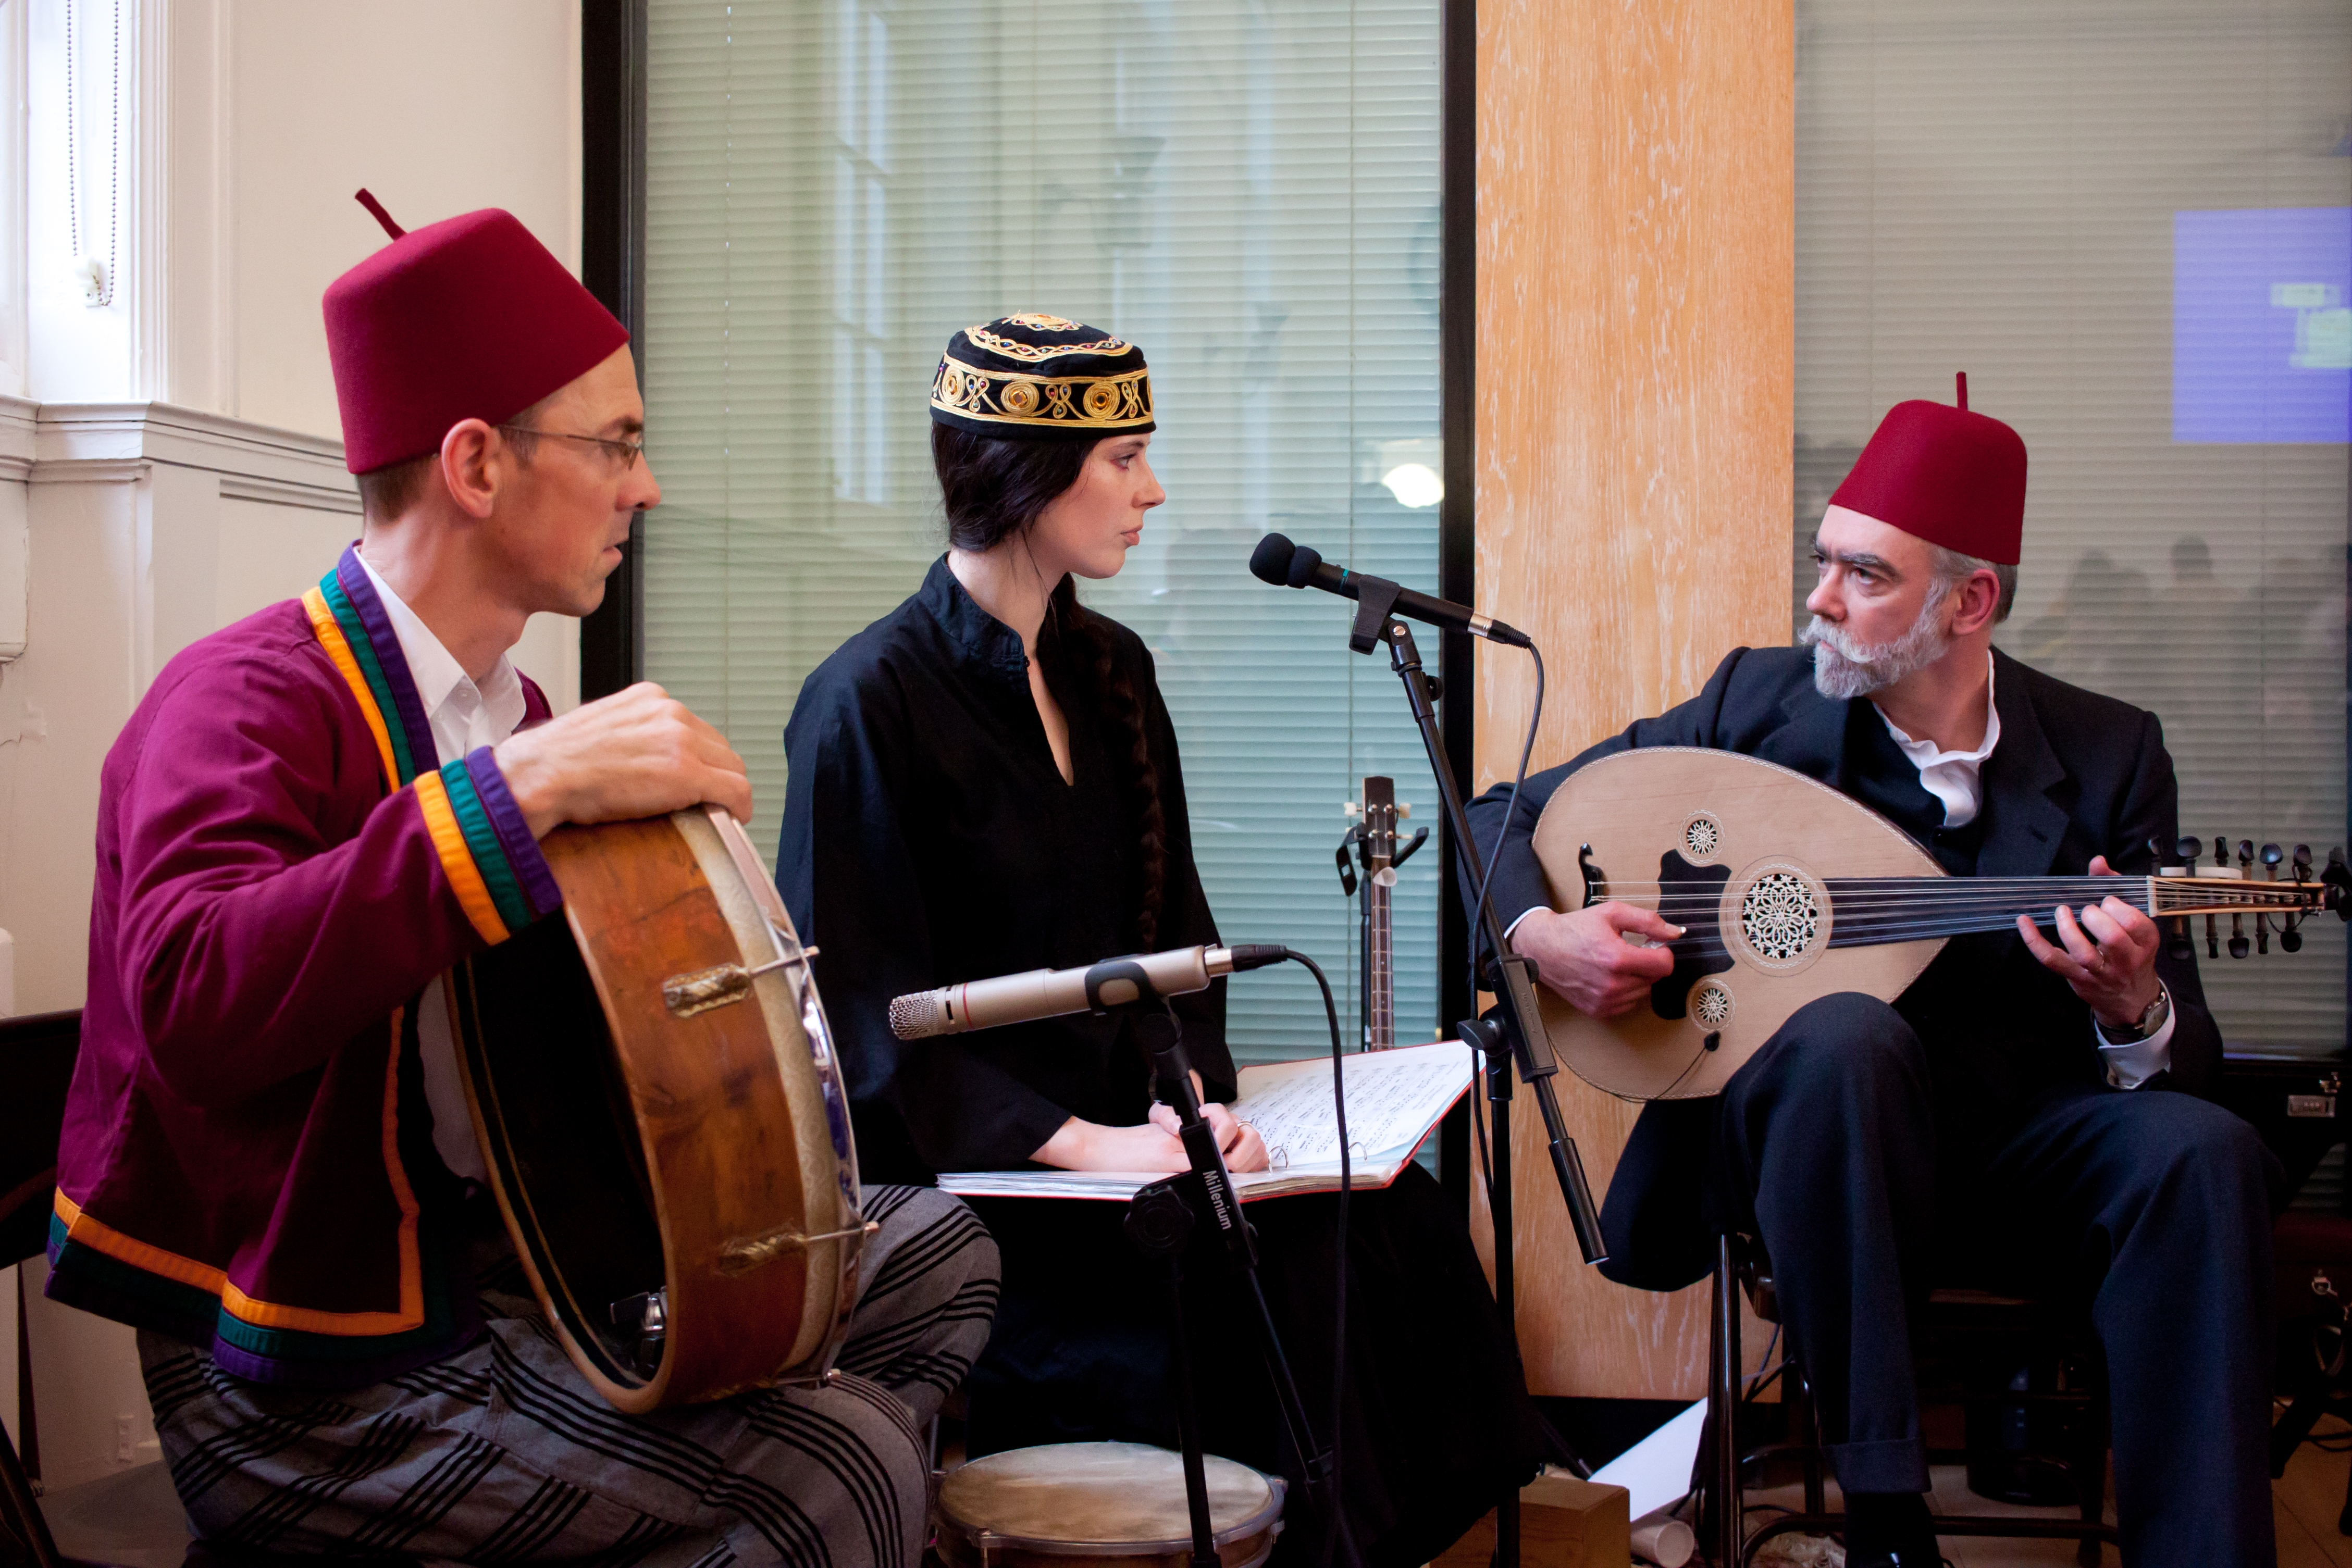 A Musical Journey Through the World of Islam